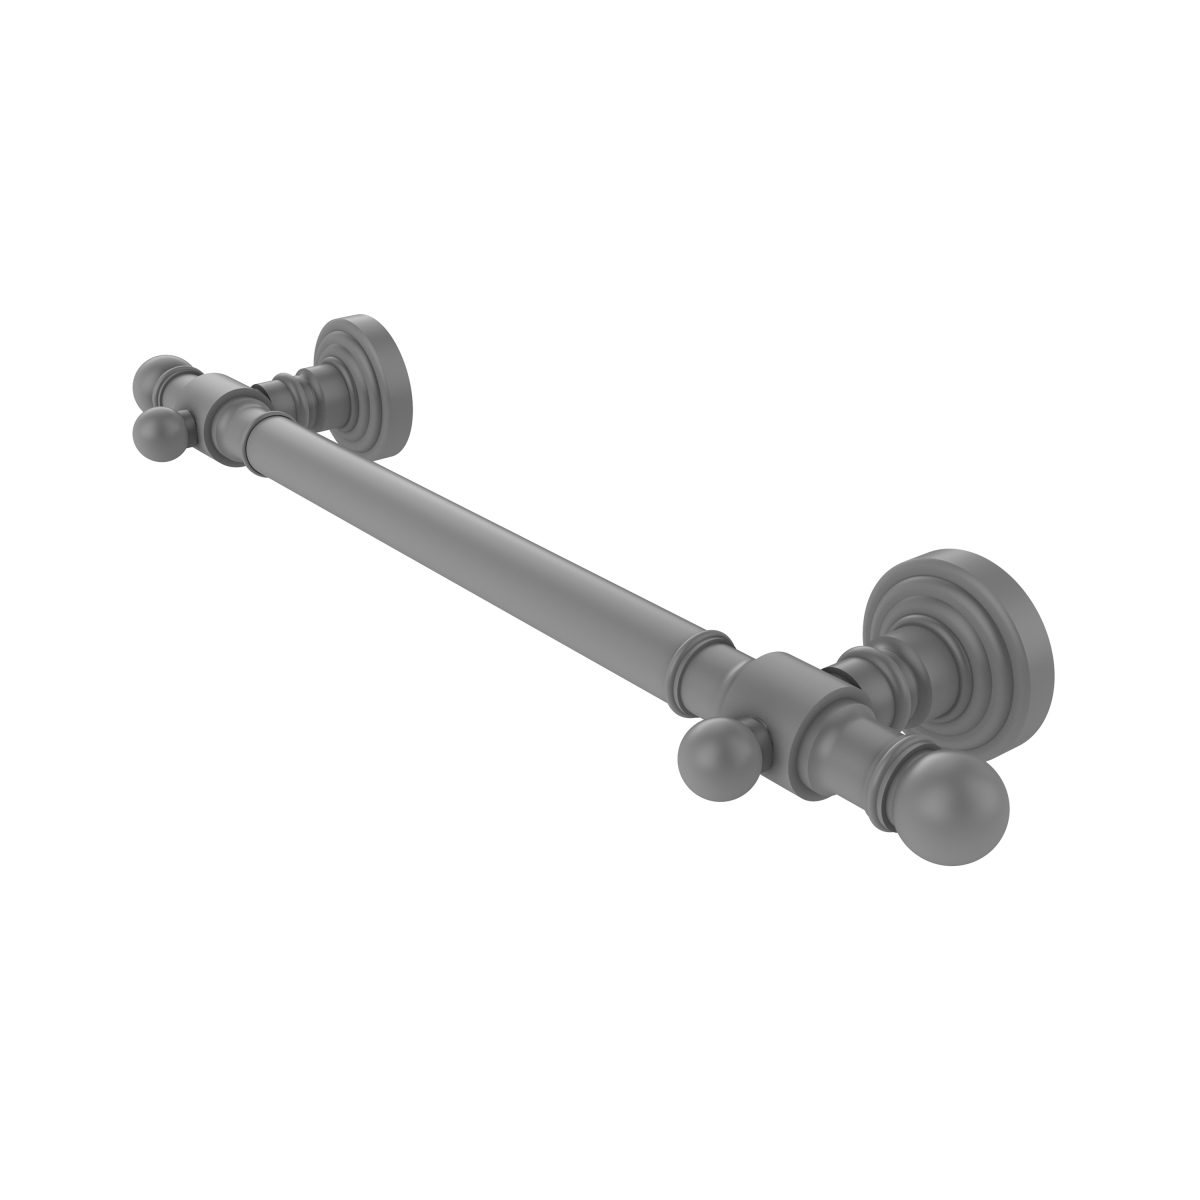 Picture of Allied Brass WP-GRS-16-GYM 16 in. Grab Bar Smooth, Matte Gray - 3.5 x 22 x 16 in.